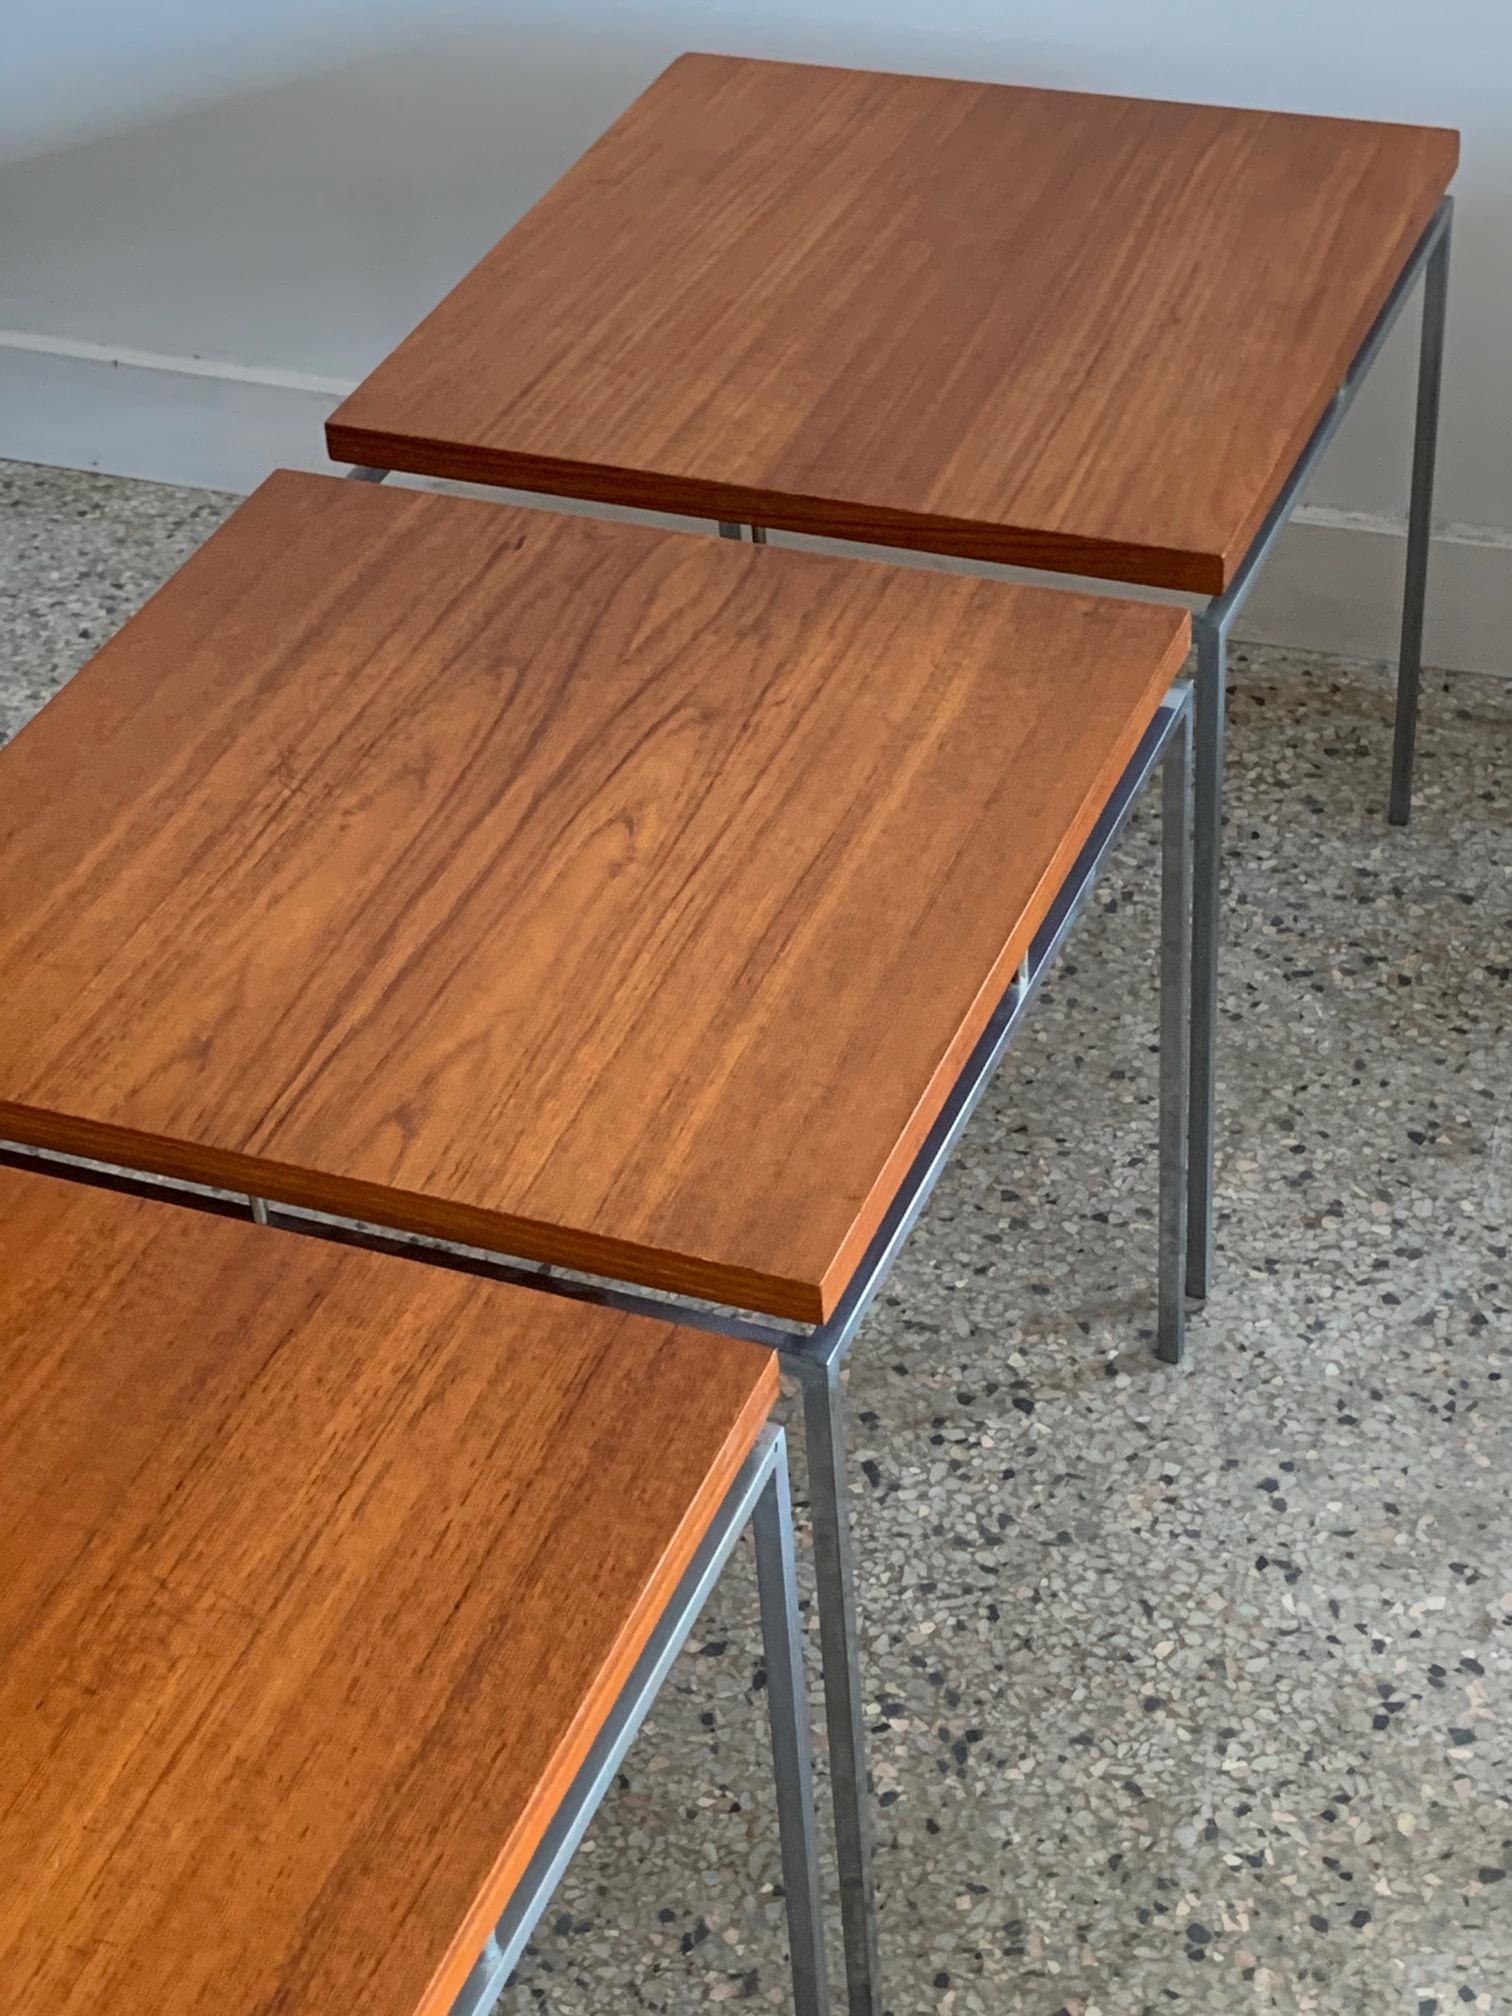 A classic Knud Joos occasional table in steel and teak for Jason Mobler, model 600. Priced individually at $1,500. Classic Minimalist design. Three available.